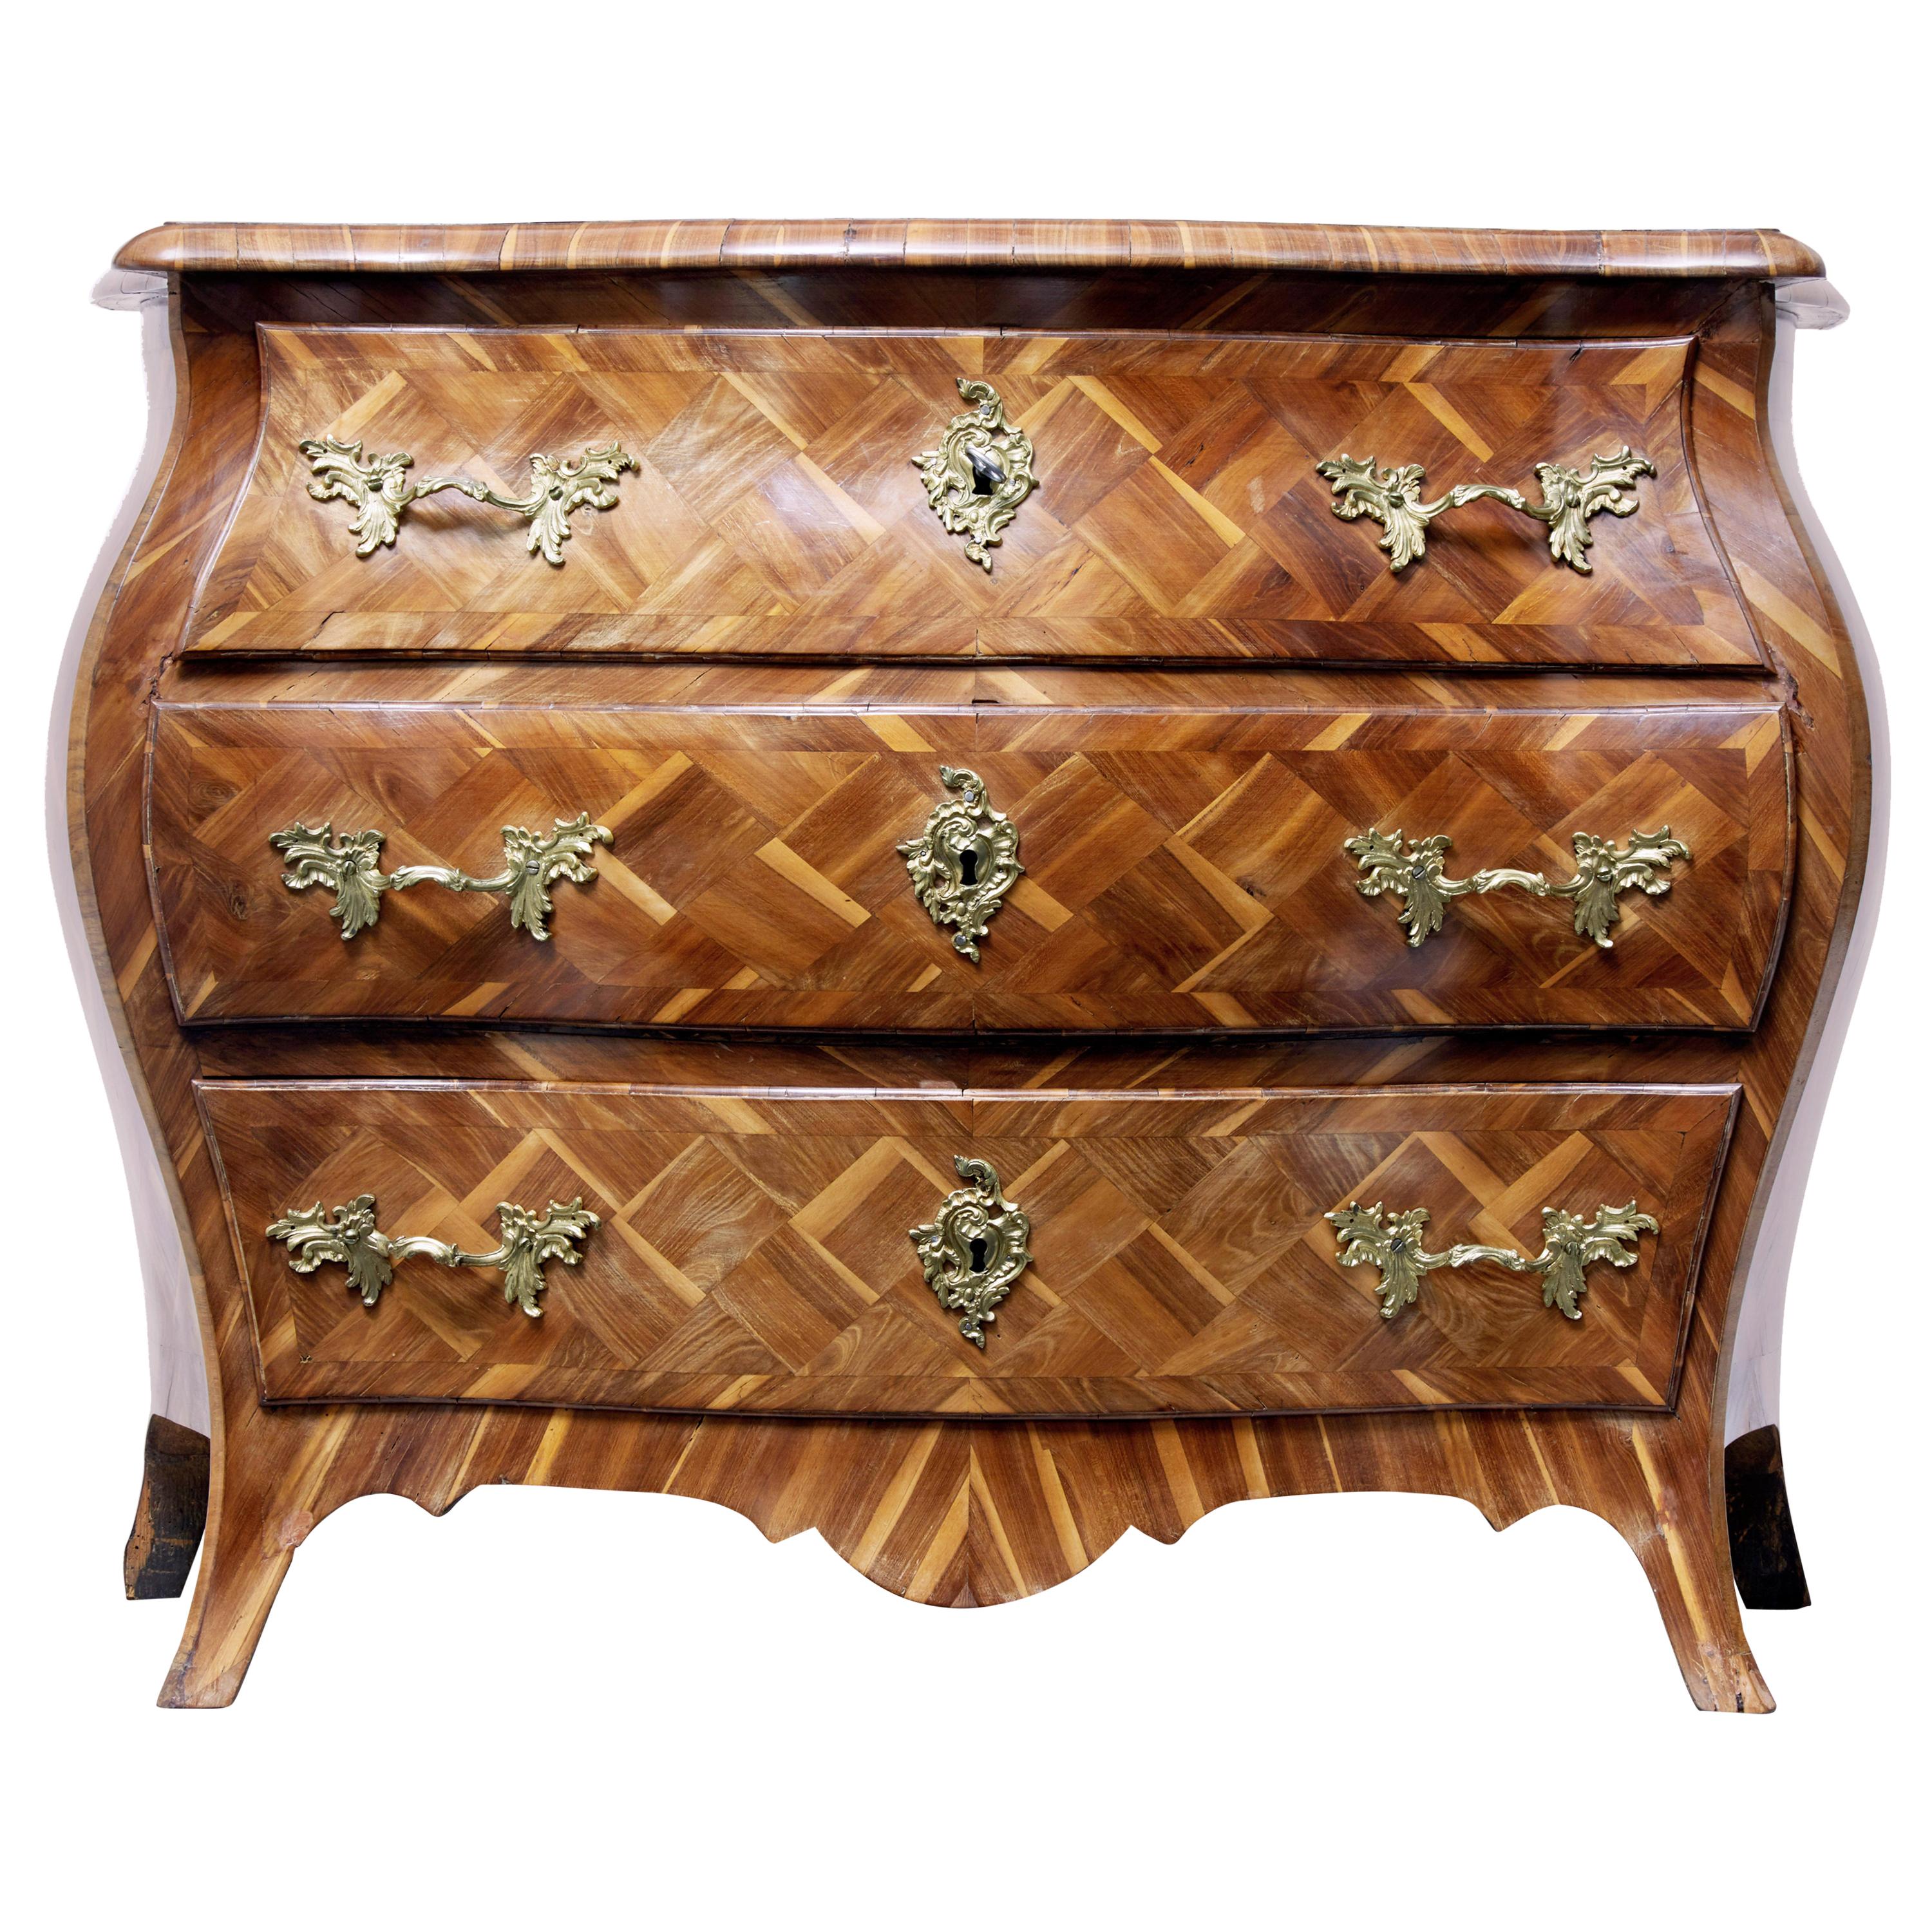 Early 18th Century Rococo Parquetry Plum Bombe Commode